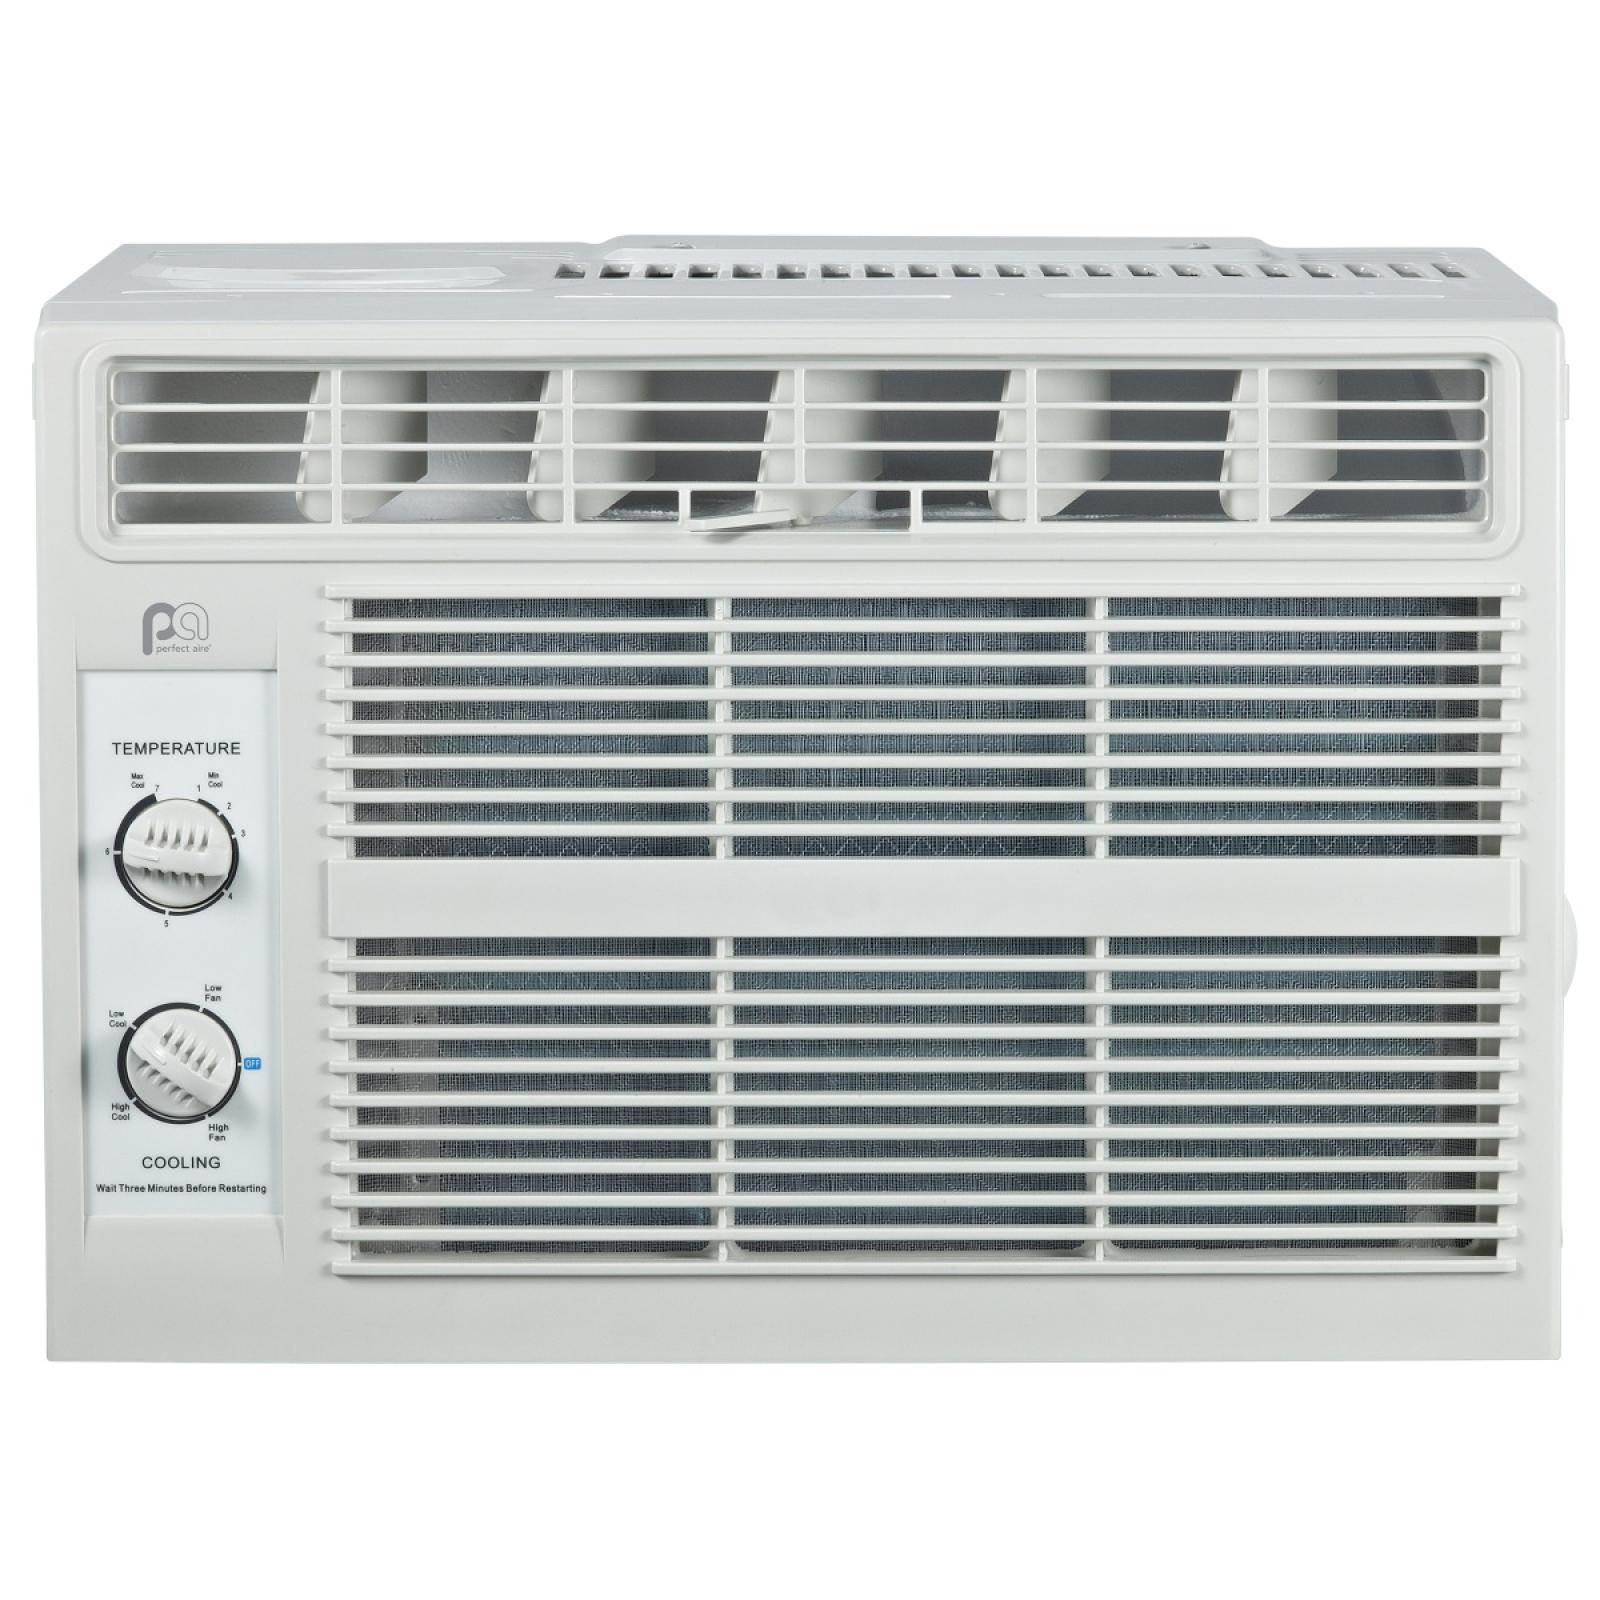 Perfect Aire 5,000 BTU Window Air Conditioner with Mechanical Controls